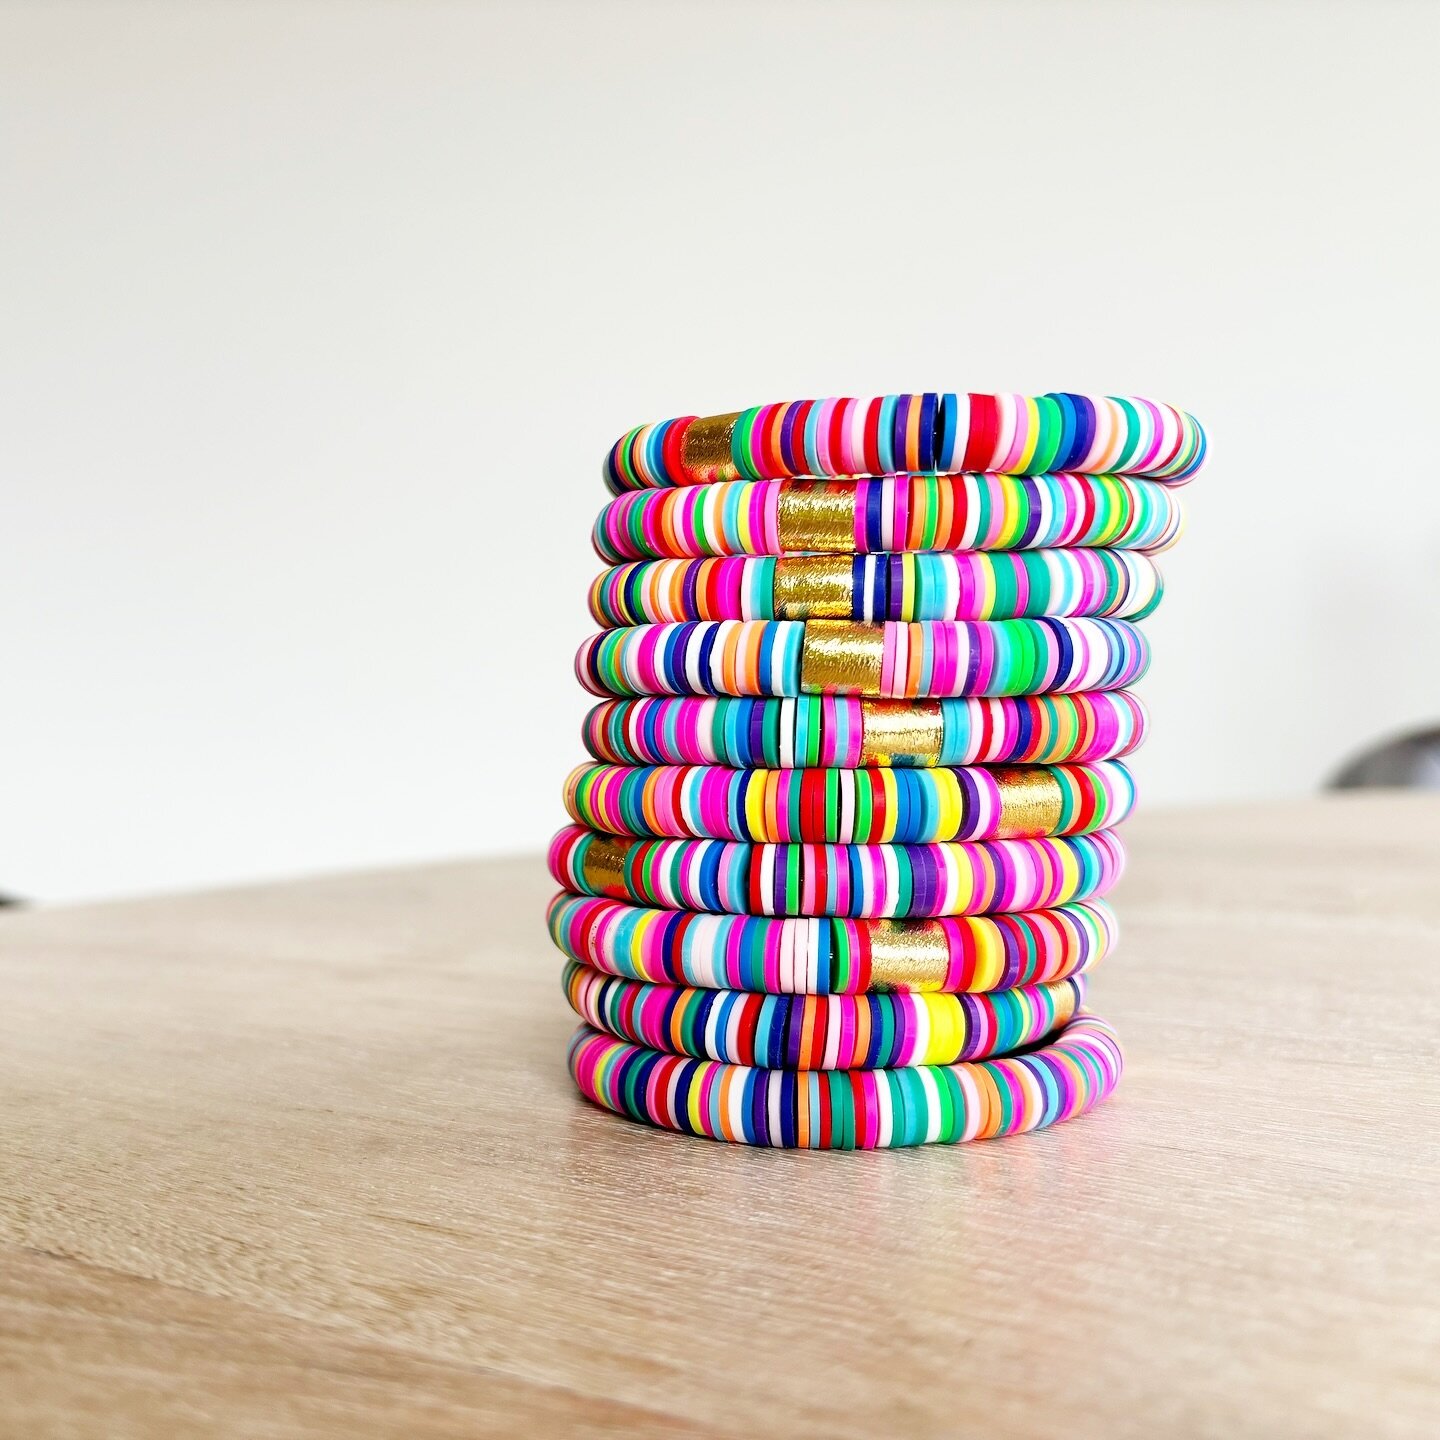 Nothing better than a tall stack of Confetti Lucis! These are an all-time fave and are a total STEAL right now with the sale we have going on! Get Spring Break-ready in just a few clicks!☀️🌸🍹